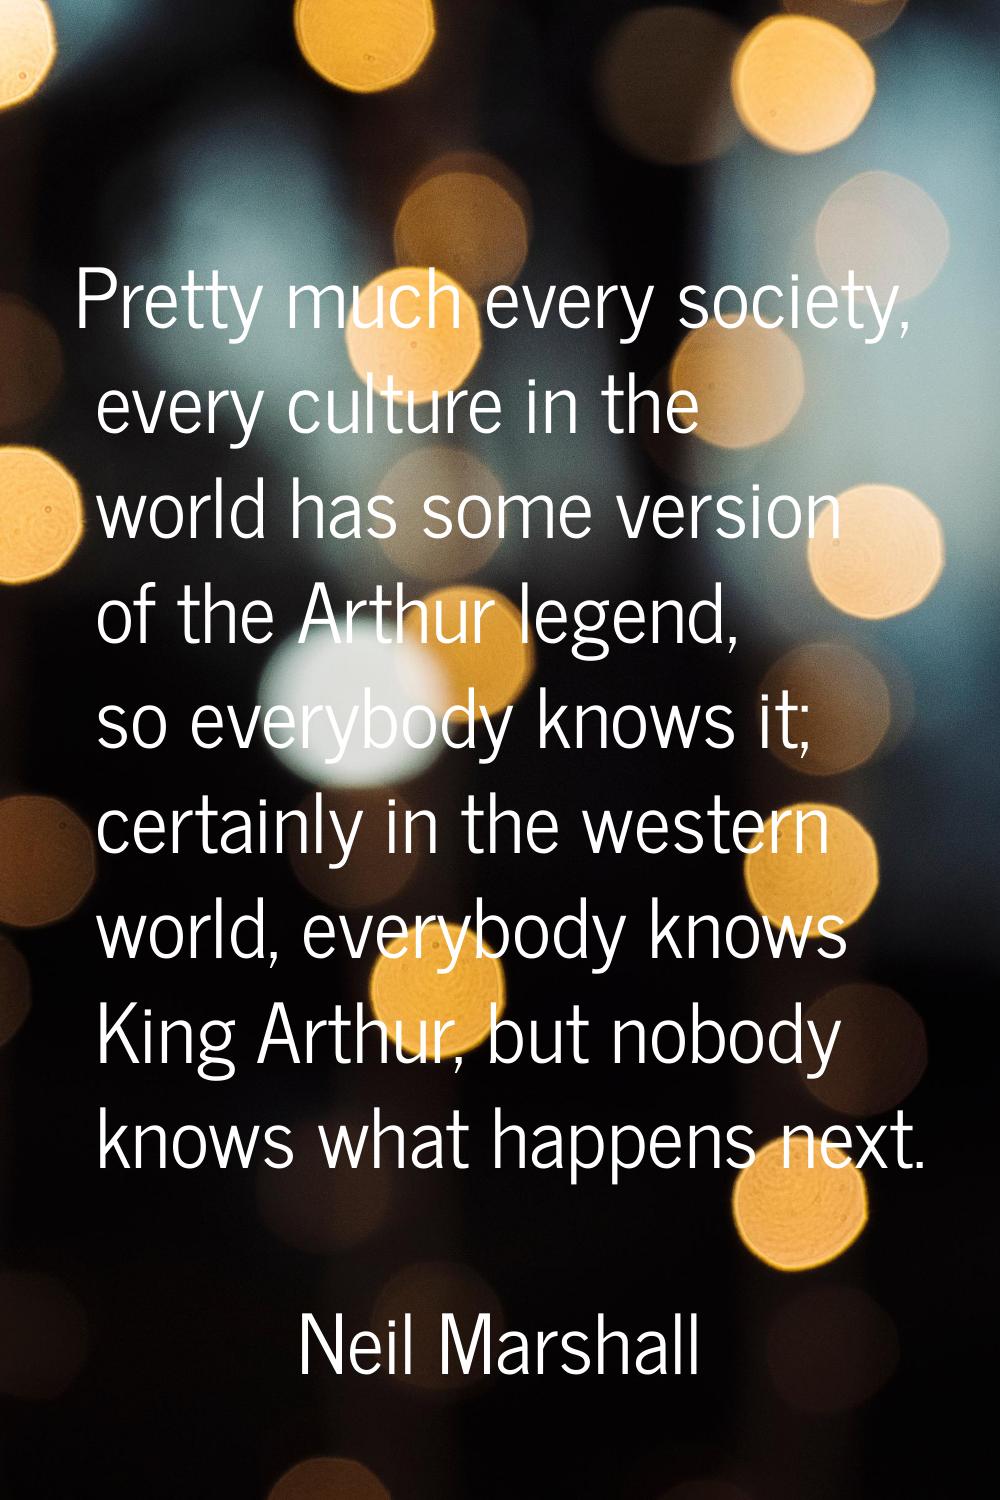 Pretty much every society, every culture in the world has some version of the Arthur legend, so eve